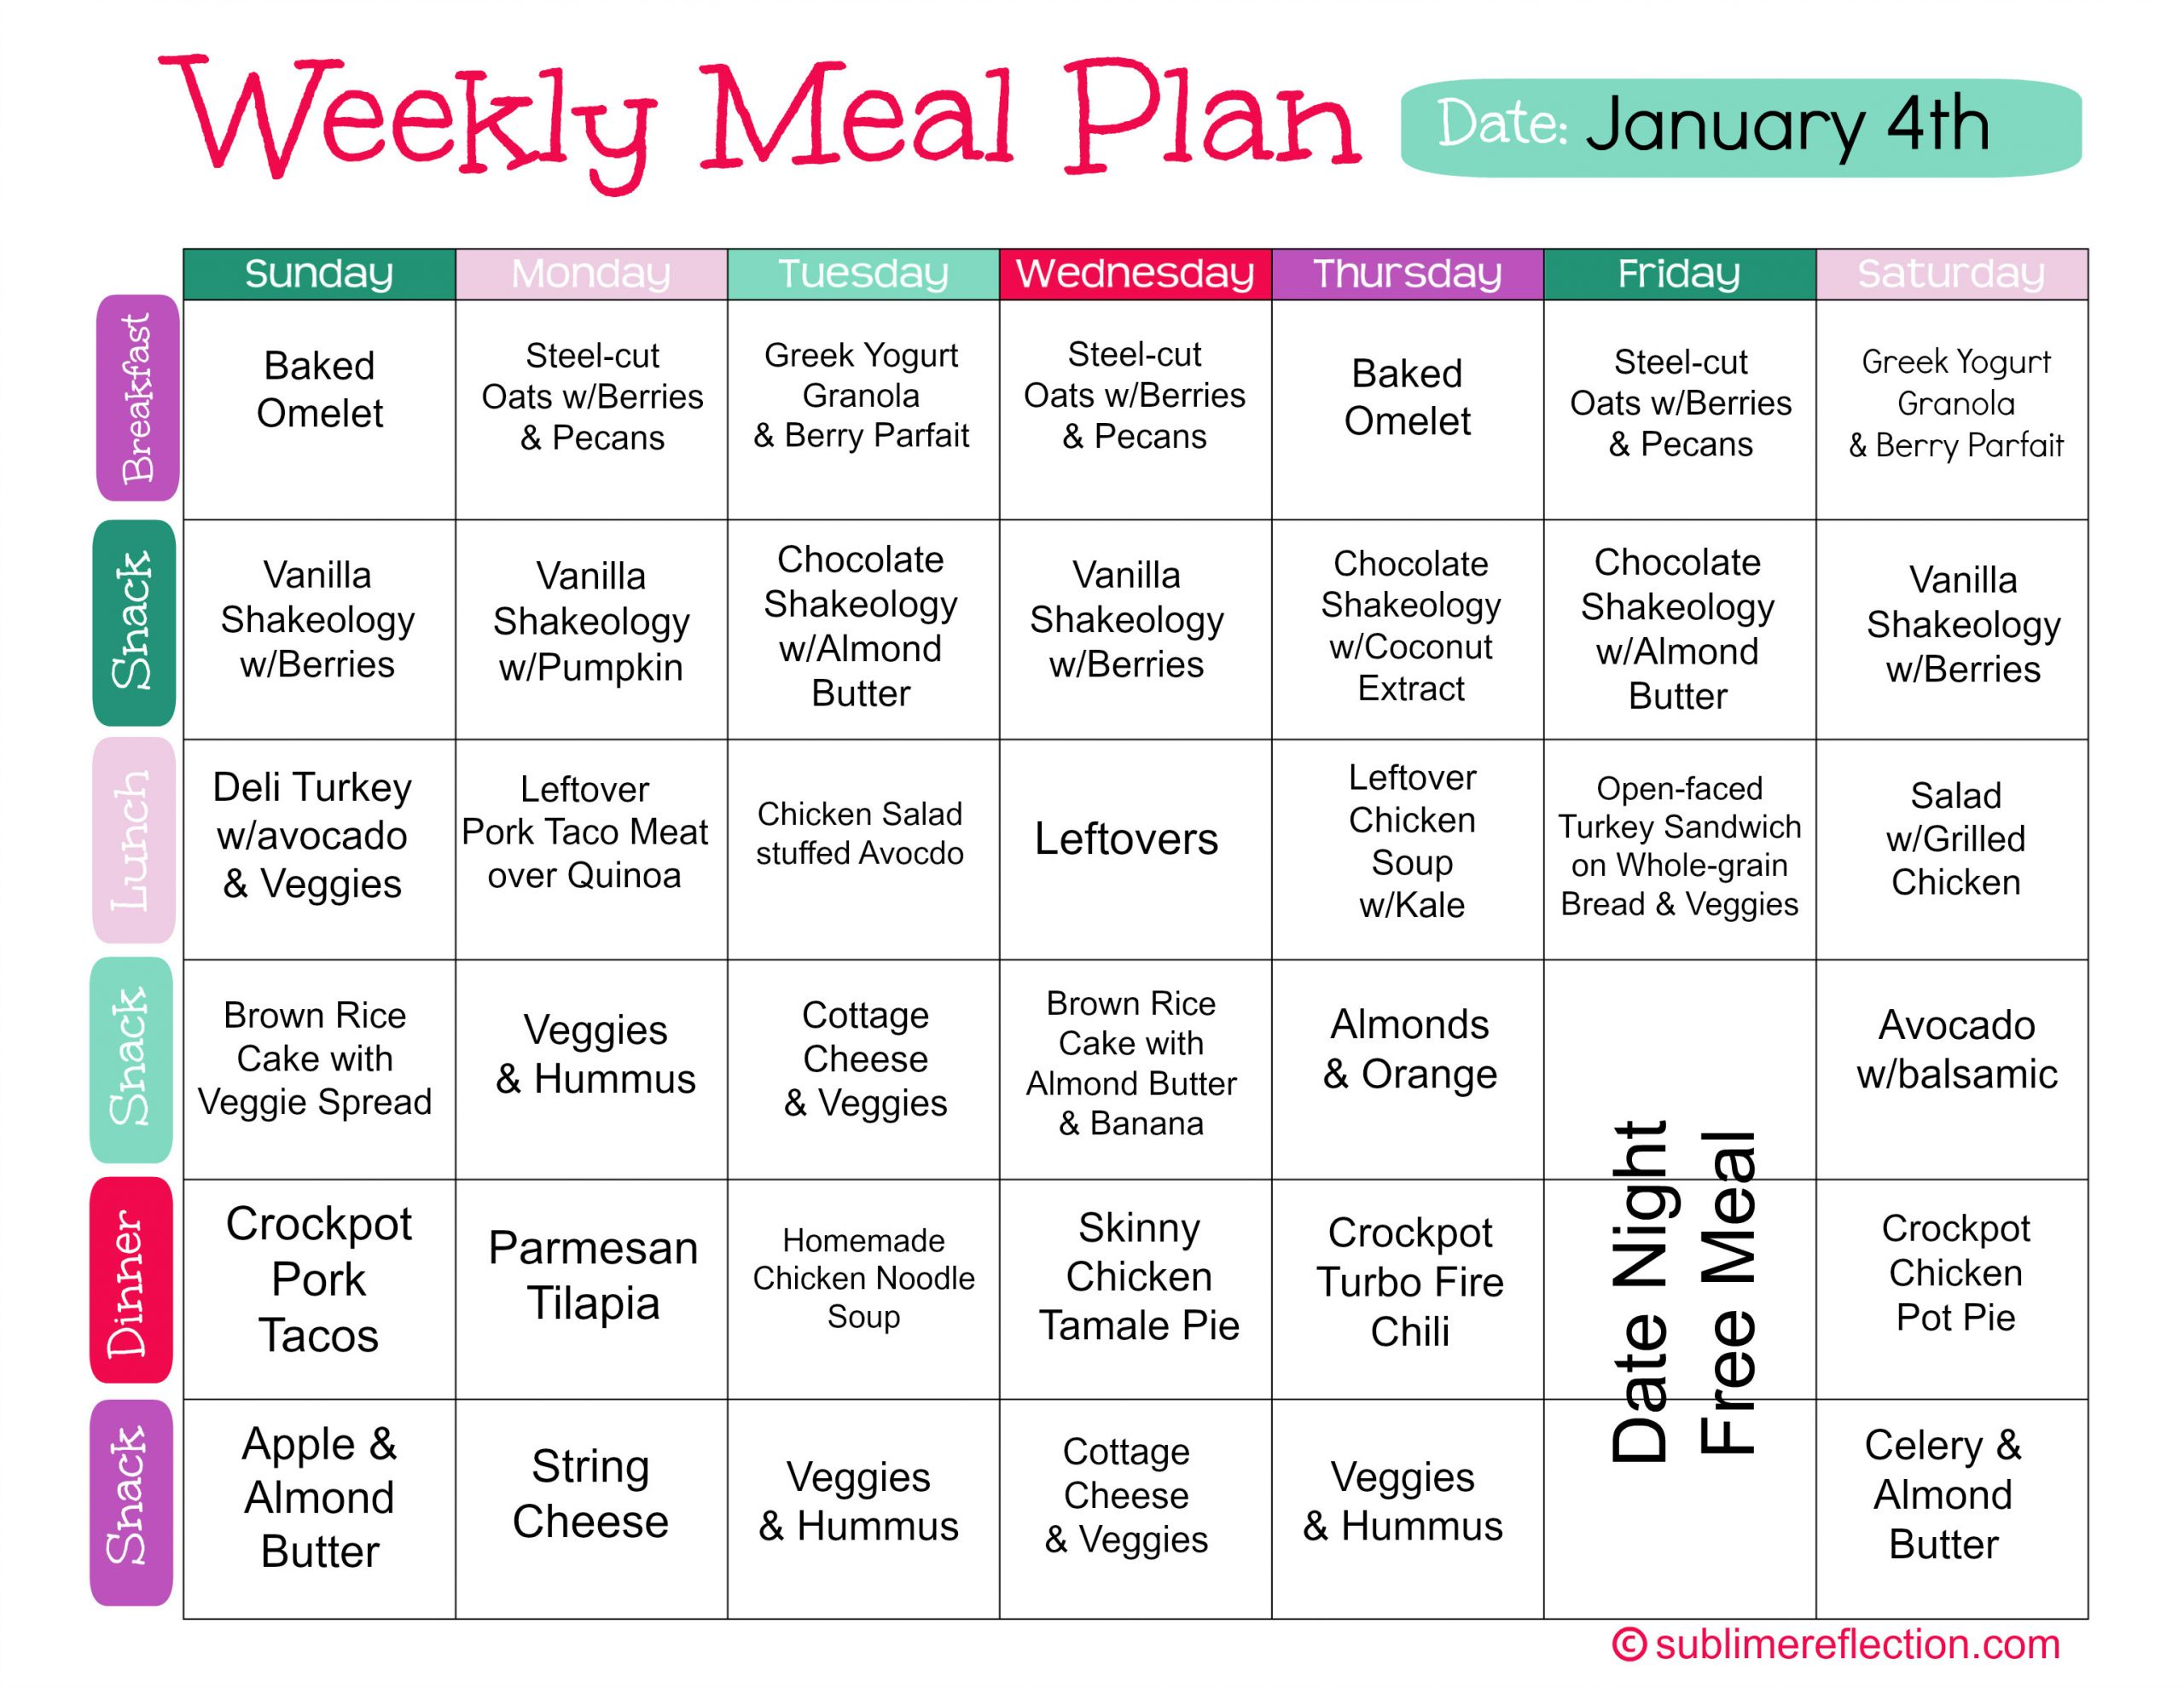 Clean Eating For A Week
 Transitioning Your Family to a Clean Eating Meal Plan